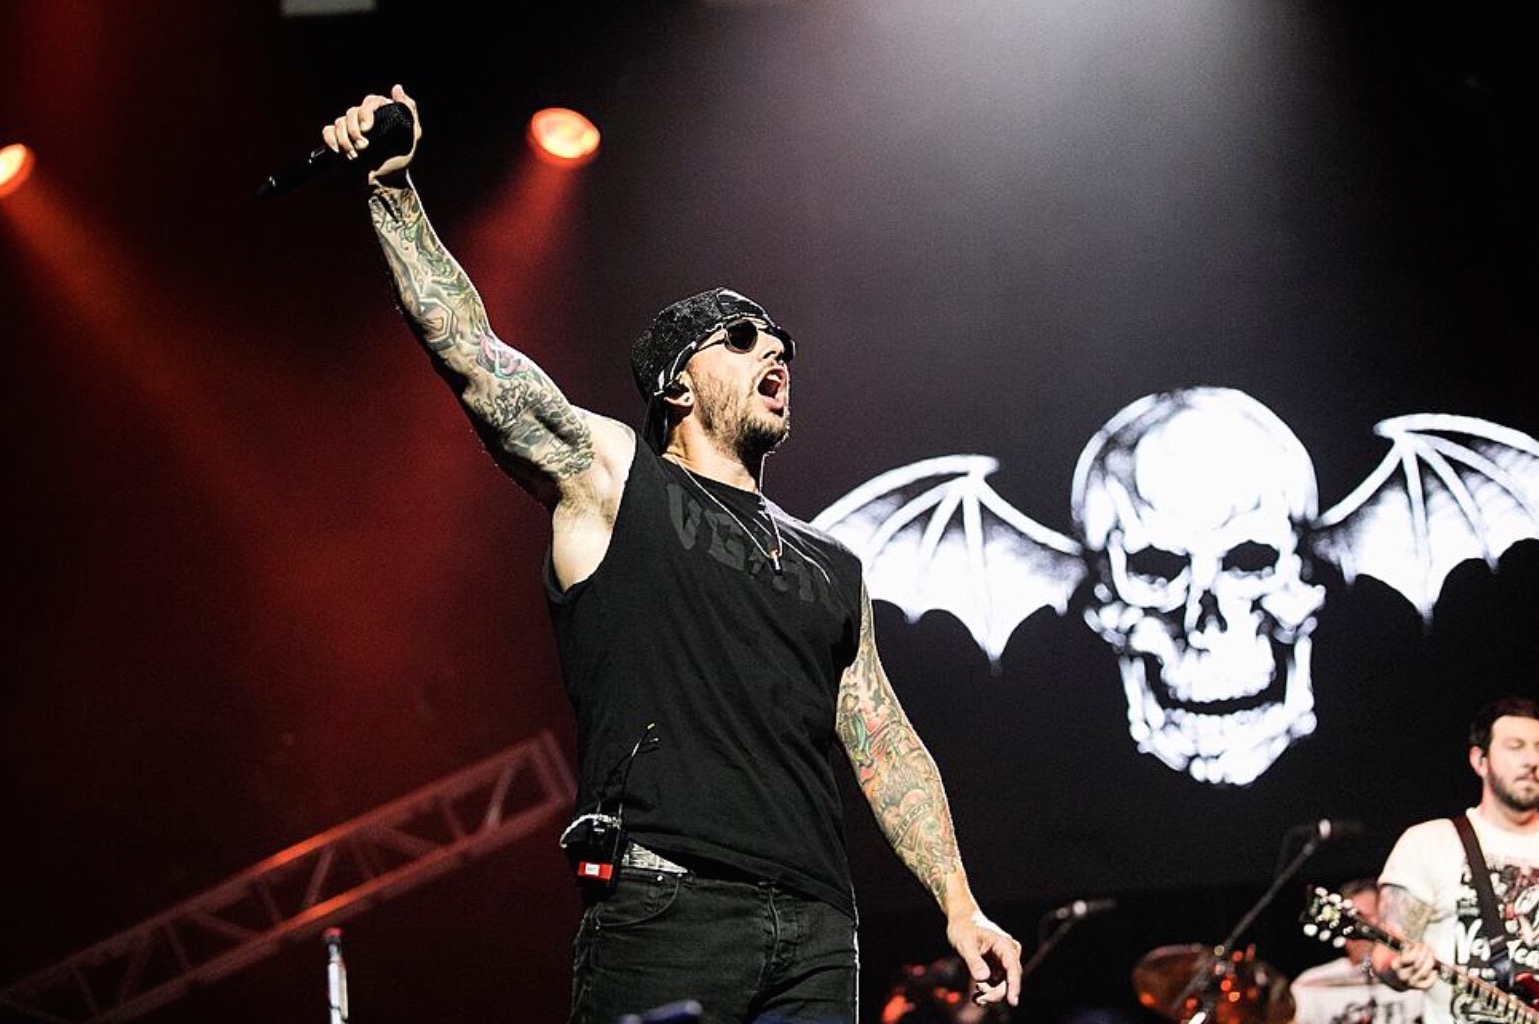 Avenged Sevenfold - Photo by Matt Stasi for Loudwire